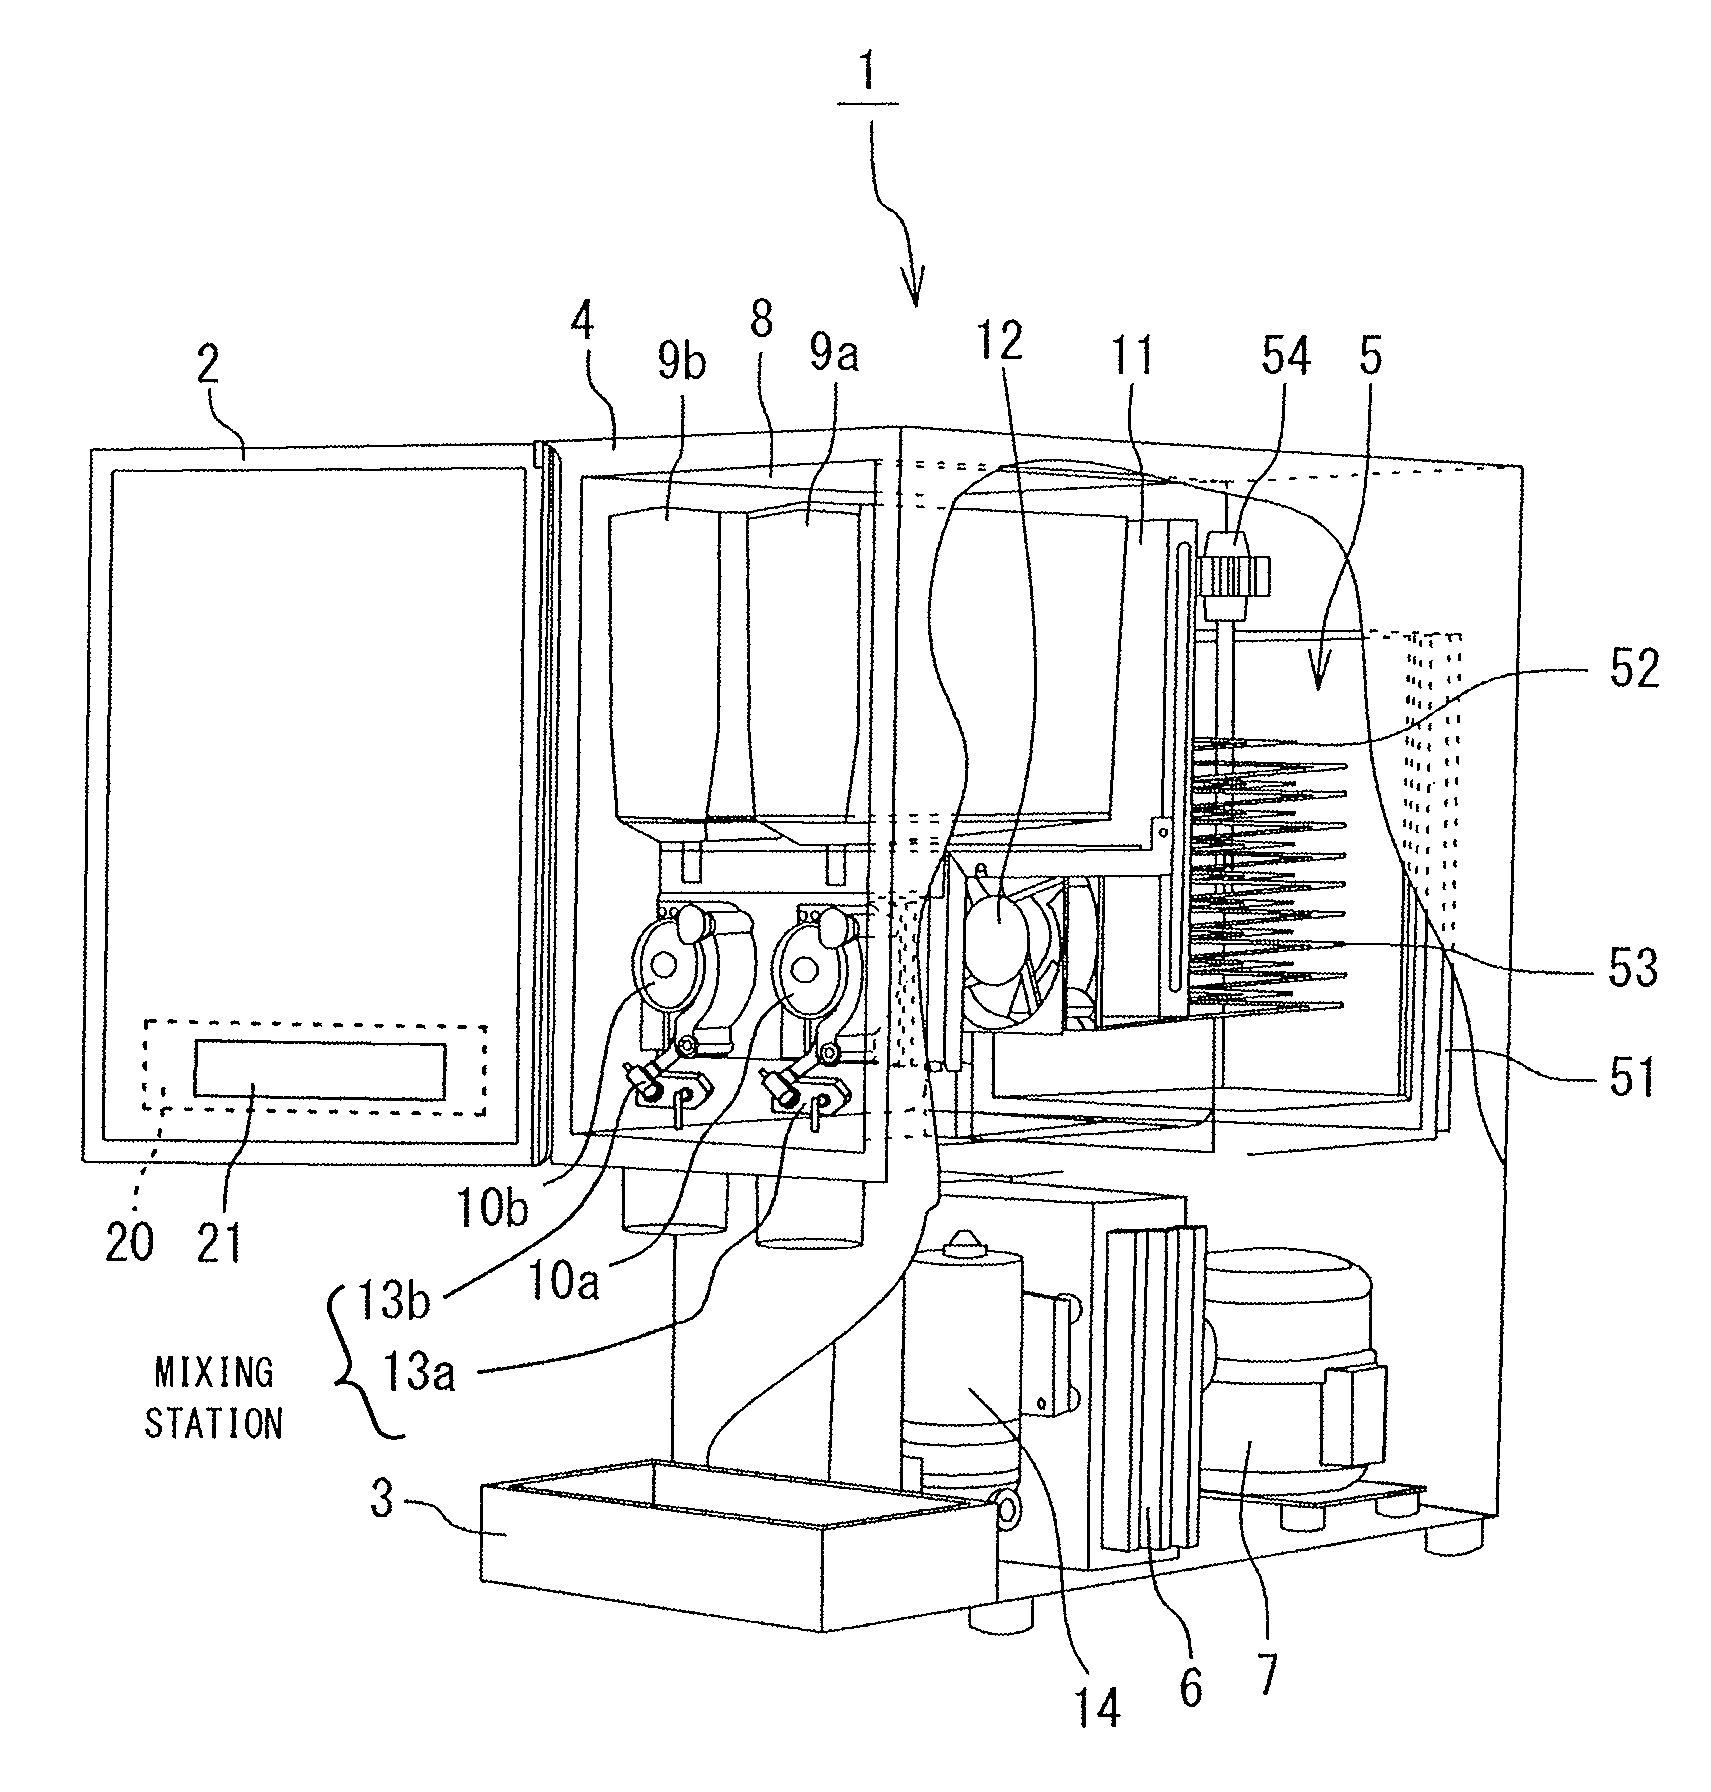 Apparatus for and method of adjusting dilution ratio in beverage dispenser